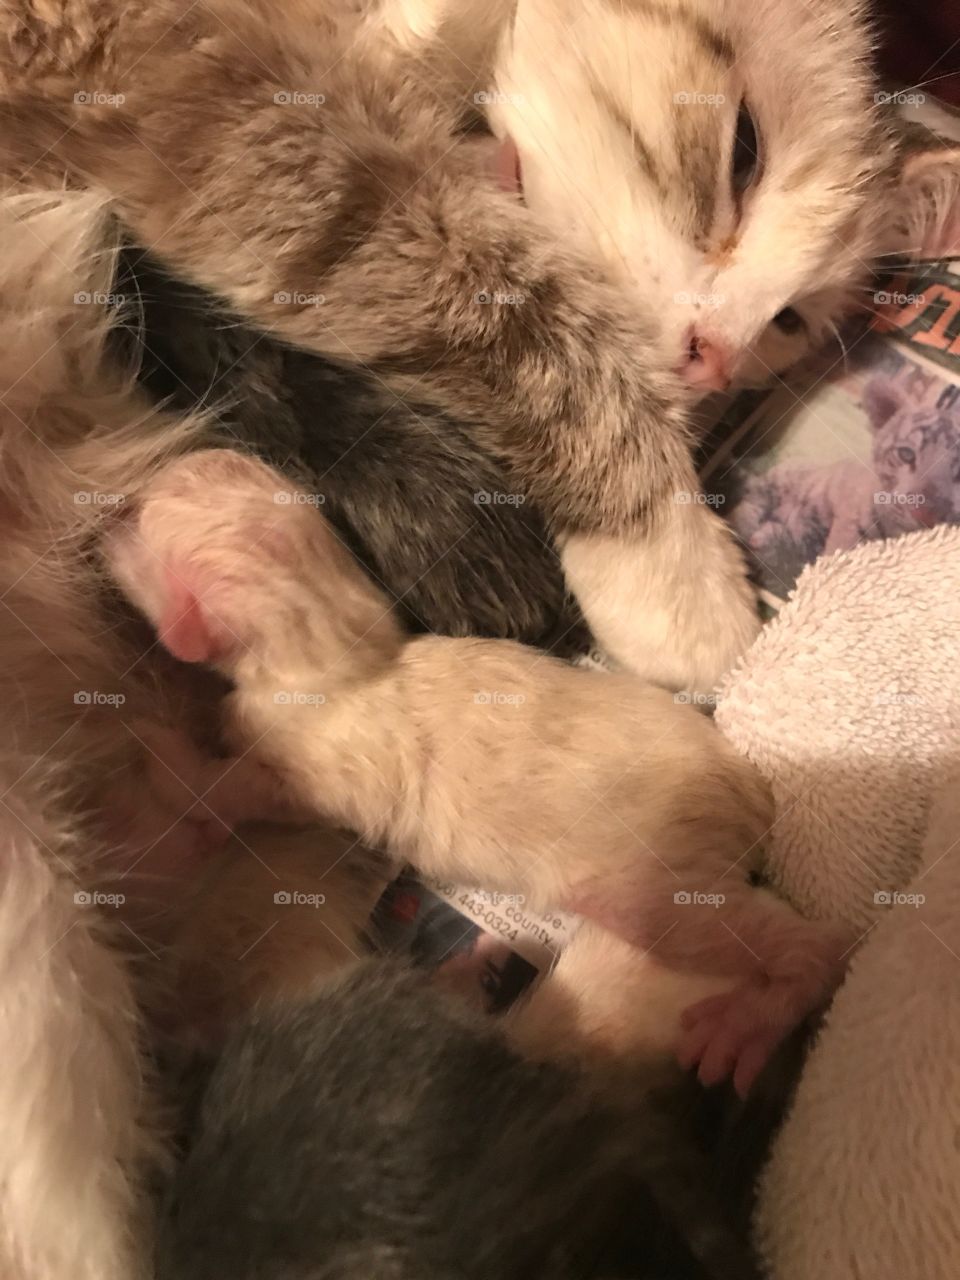 Cookie being a good new mommy